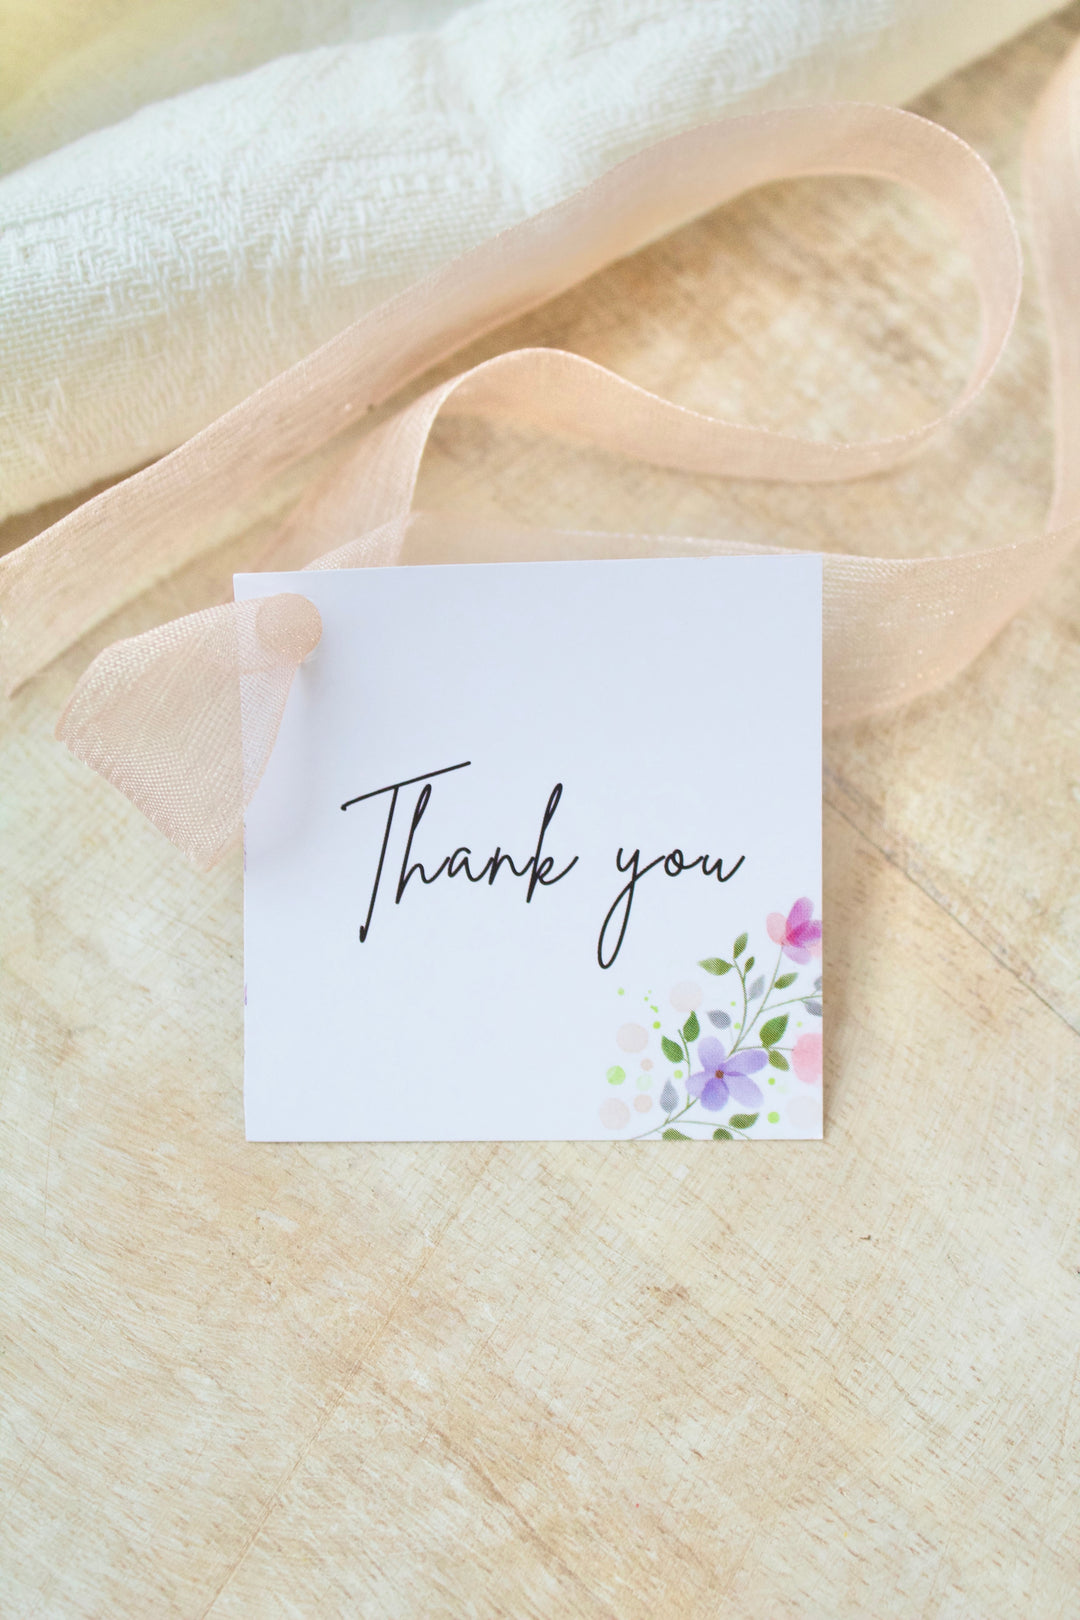 Thank you floral - tags for cookies - 25pcs - WITHOUT HOLES